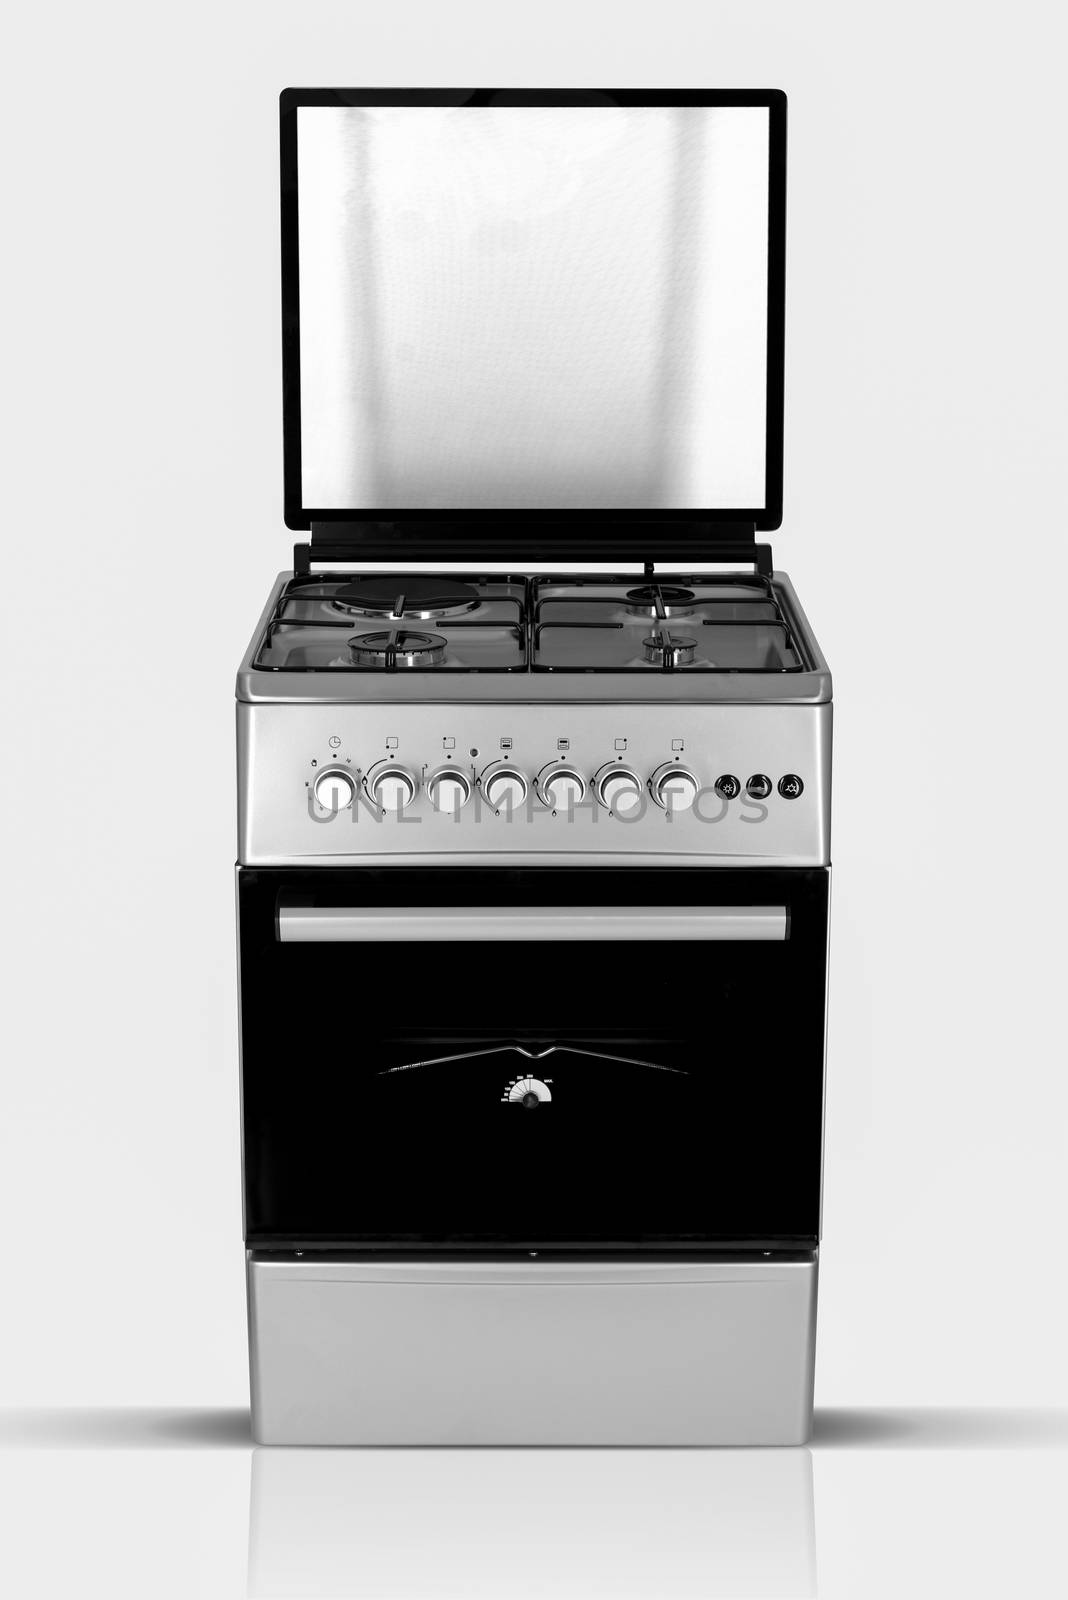 oven over white background by A_Karim